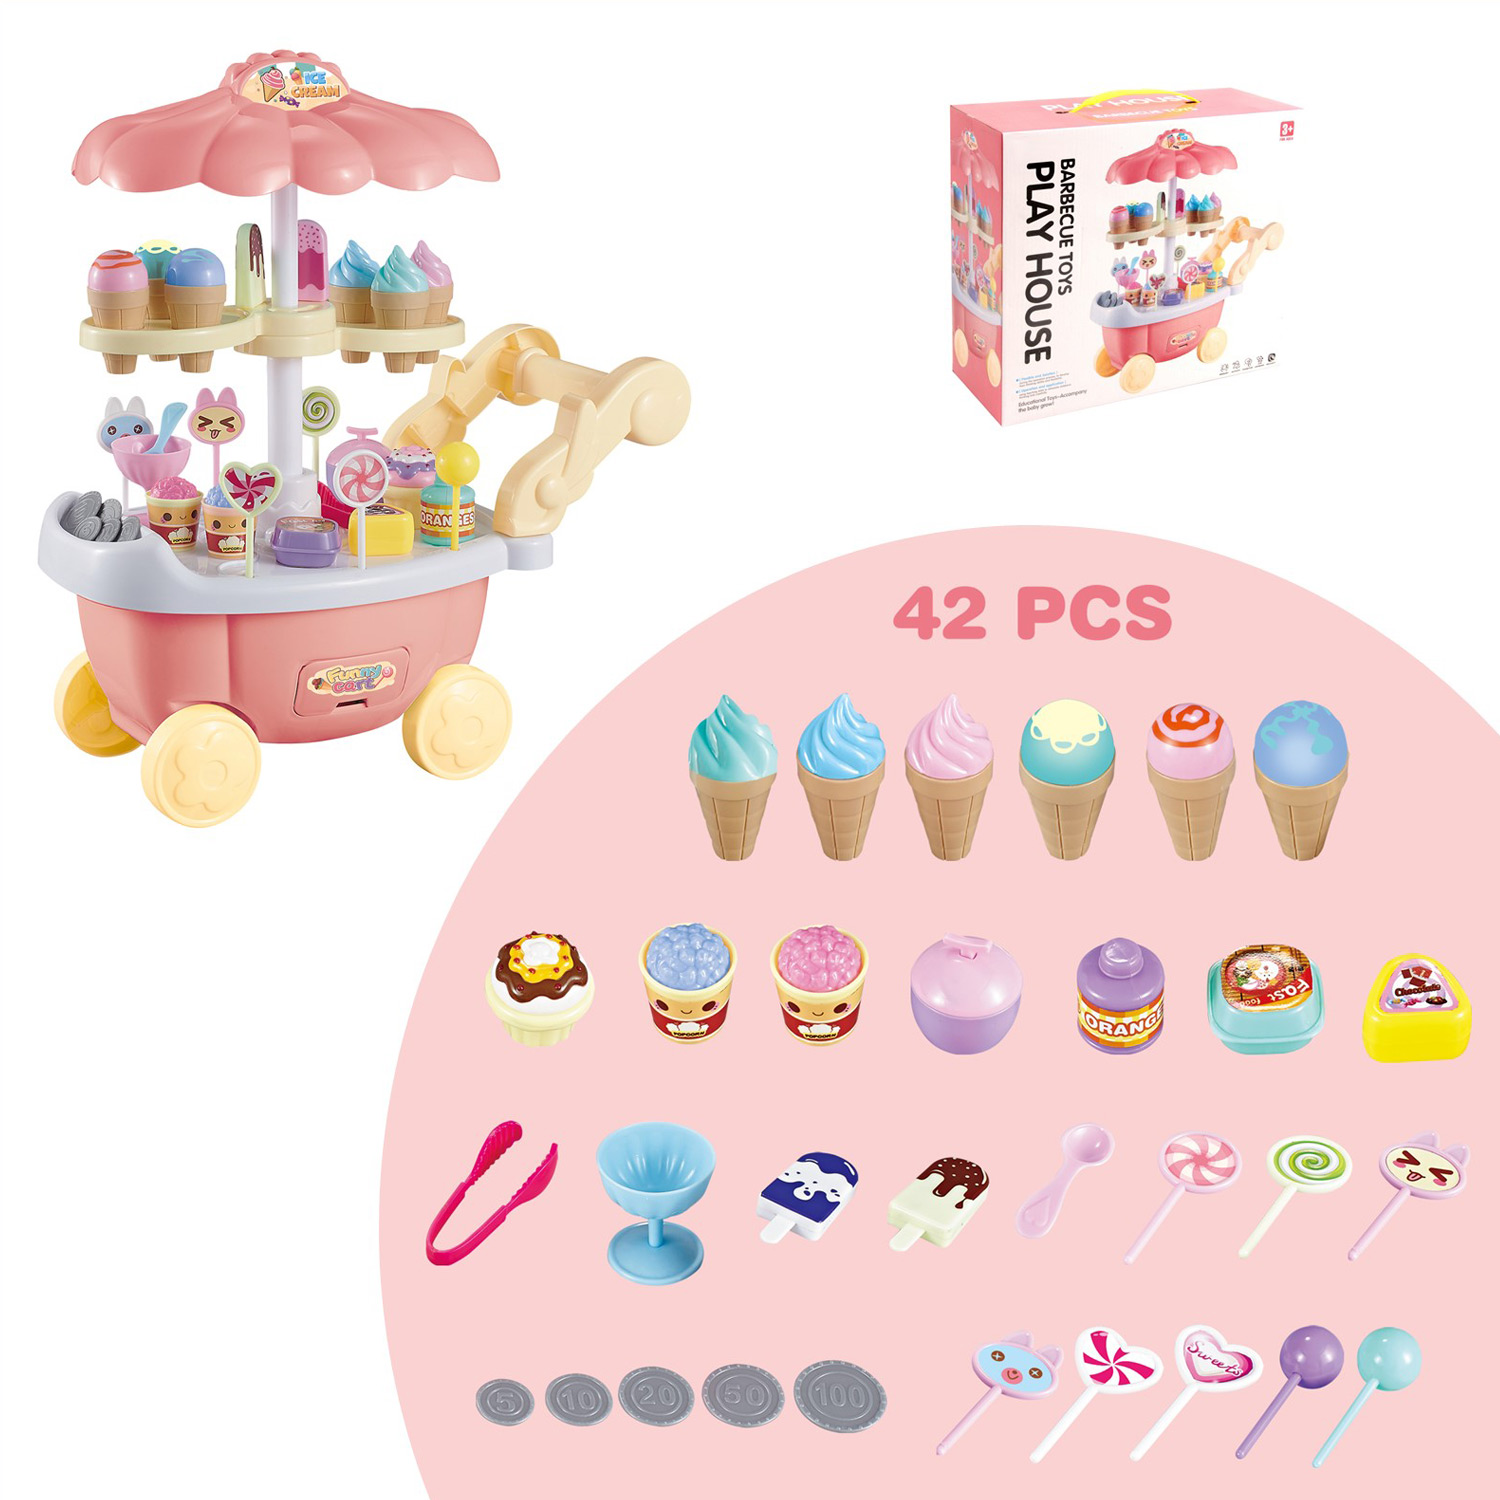 Ice Cream Cart 39 Pieces Dessert Candy Trolley Kitchen Toy Set With Lights Music Includes Umbrella Food Accessories 3 feet tall Childrens Pretend Play Truck Playset Appliance Set Pieces Perfect For Early Learning Educational Girls Cooking